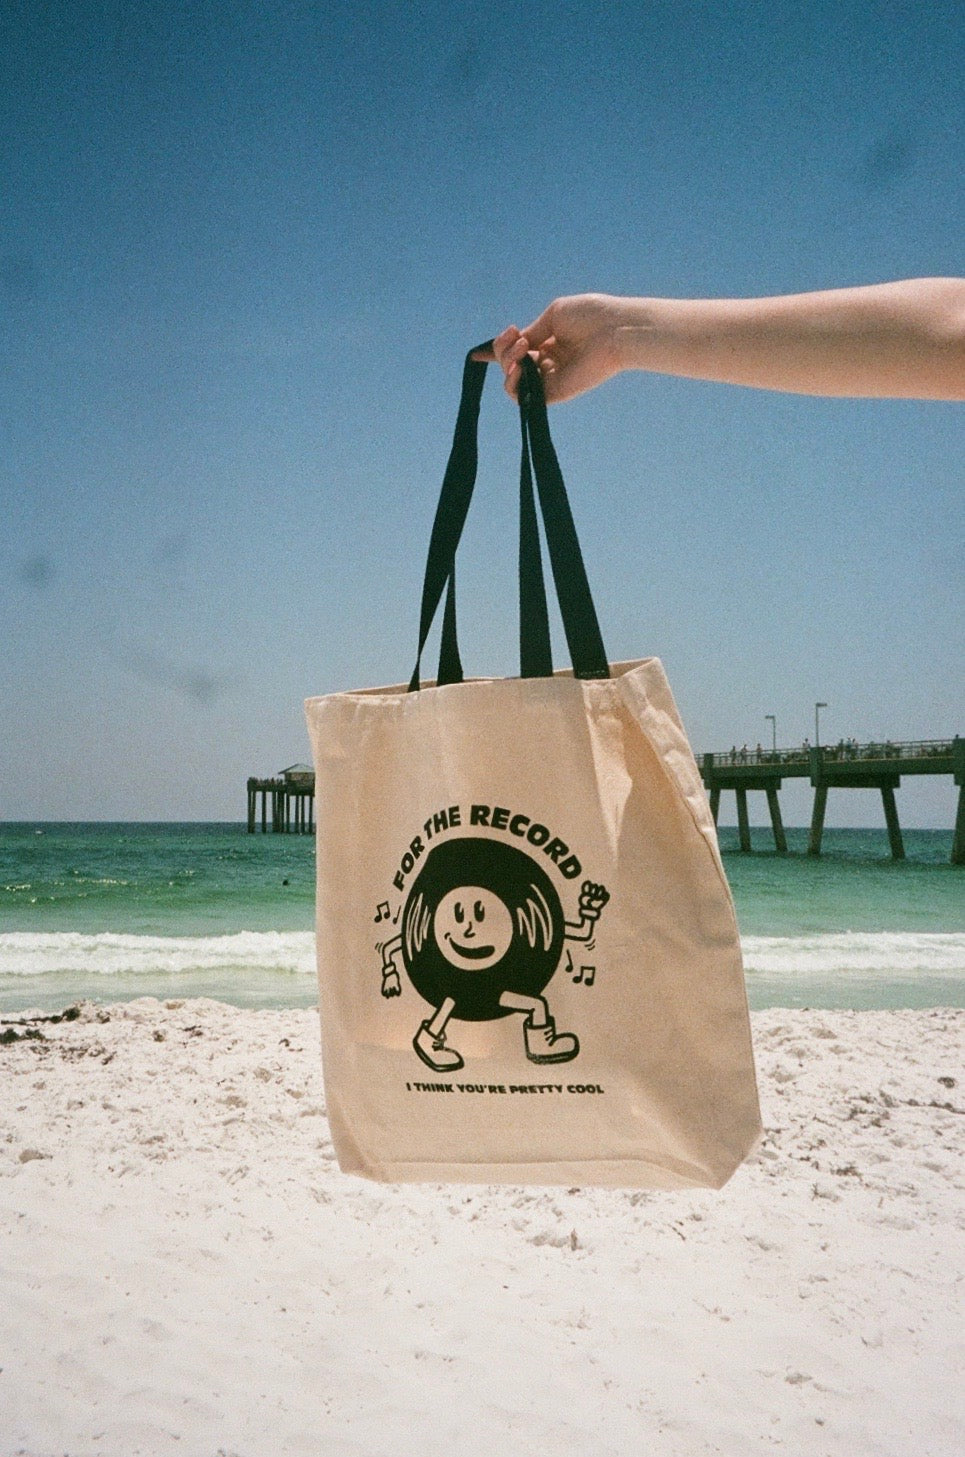 For the Record - Tote Bag